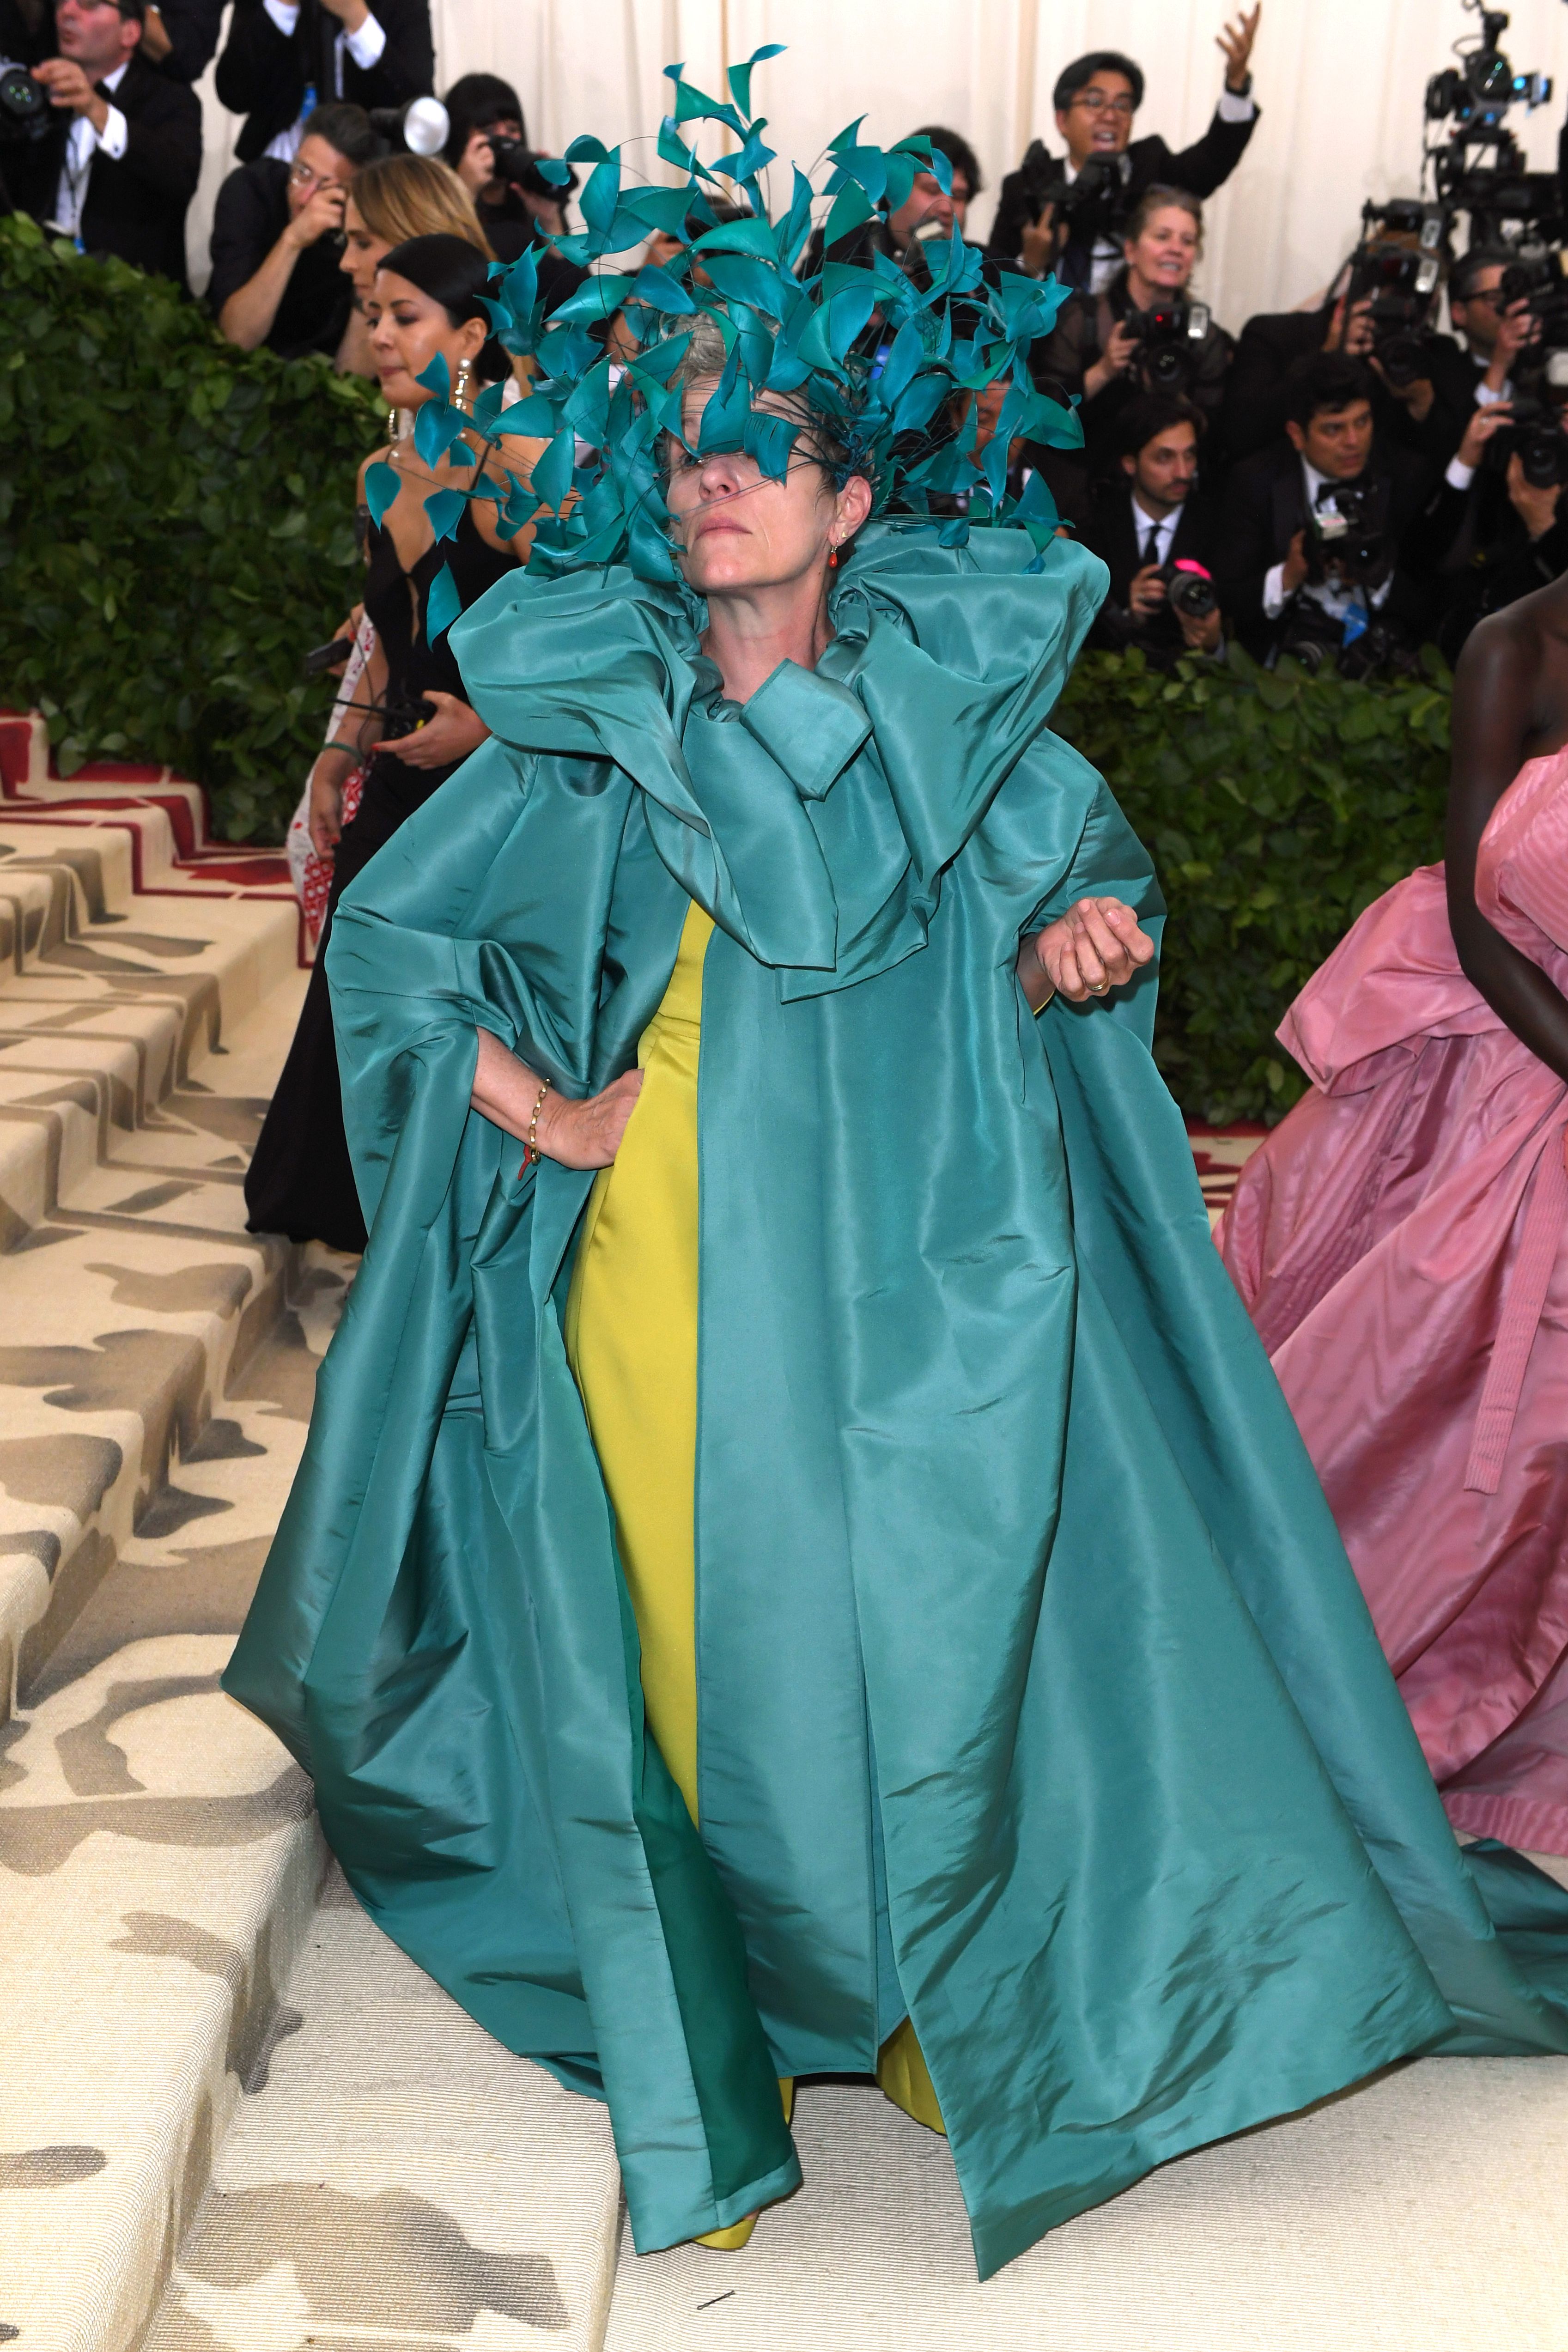 Photos from The Worst Met Gala Looks of All Time